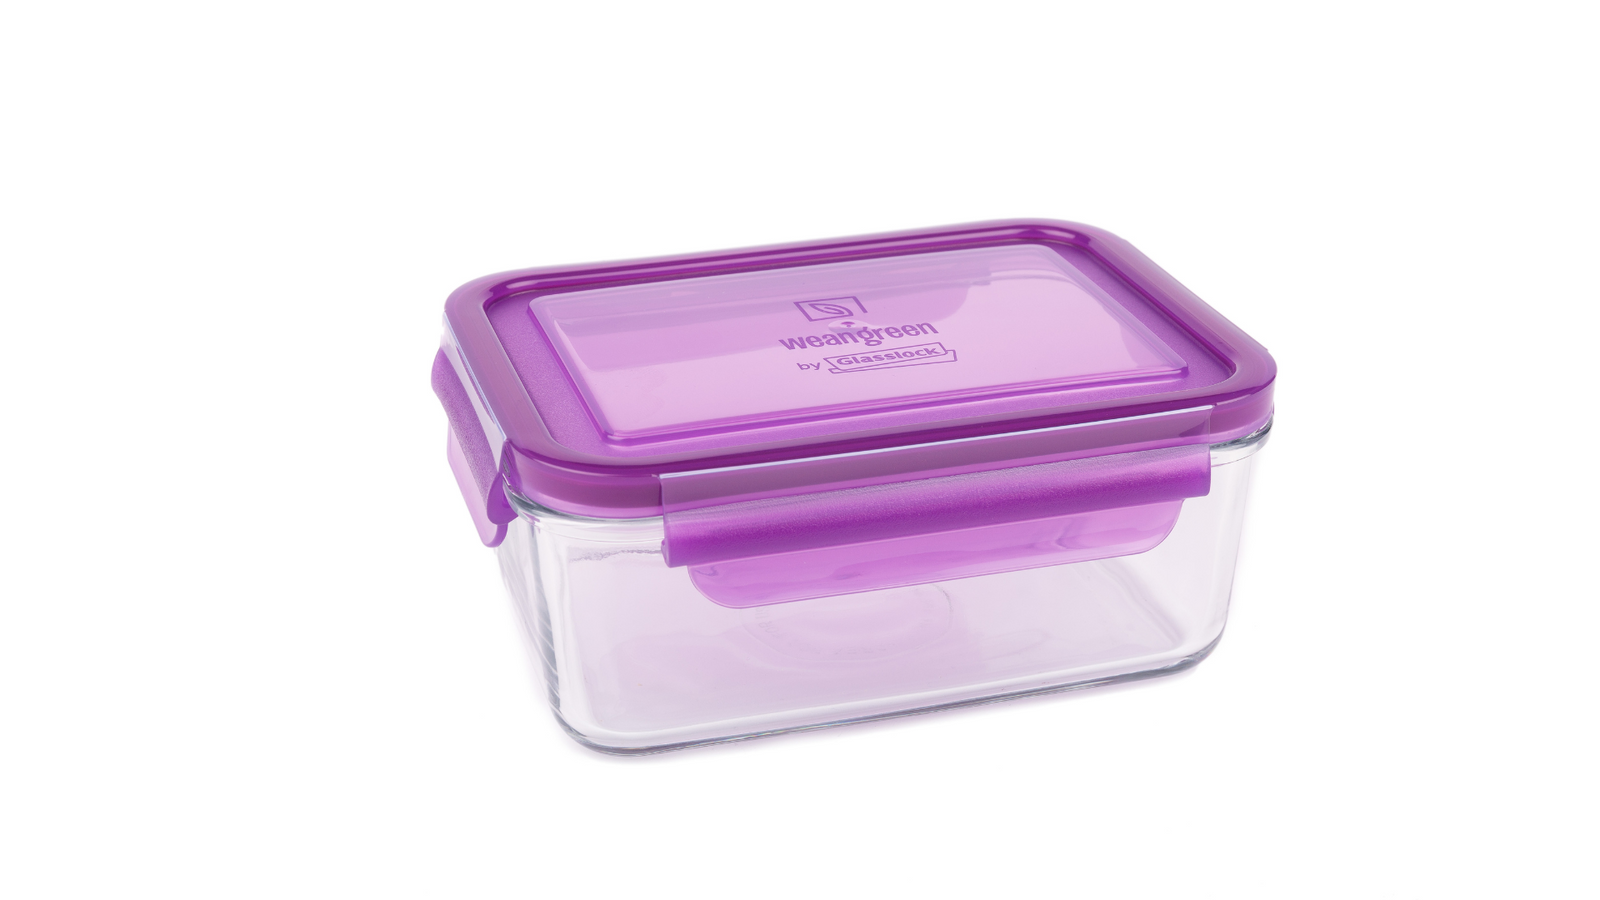 Meal Prep Container, Portable Lunch Container 1100ml Leakproof Easy To  Clean For Office Workers For School Purple,Green,Blue Yellow,Tender Pink 